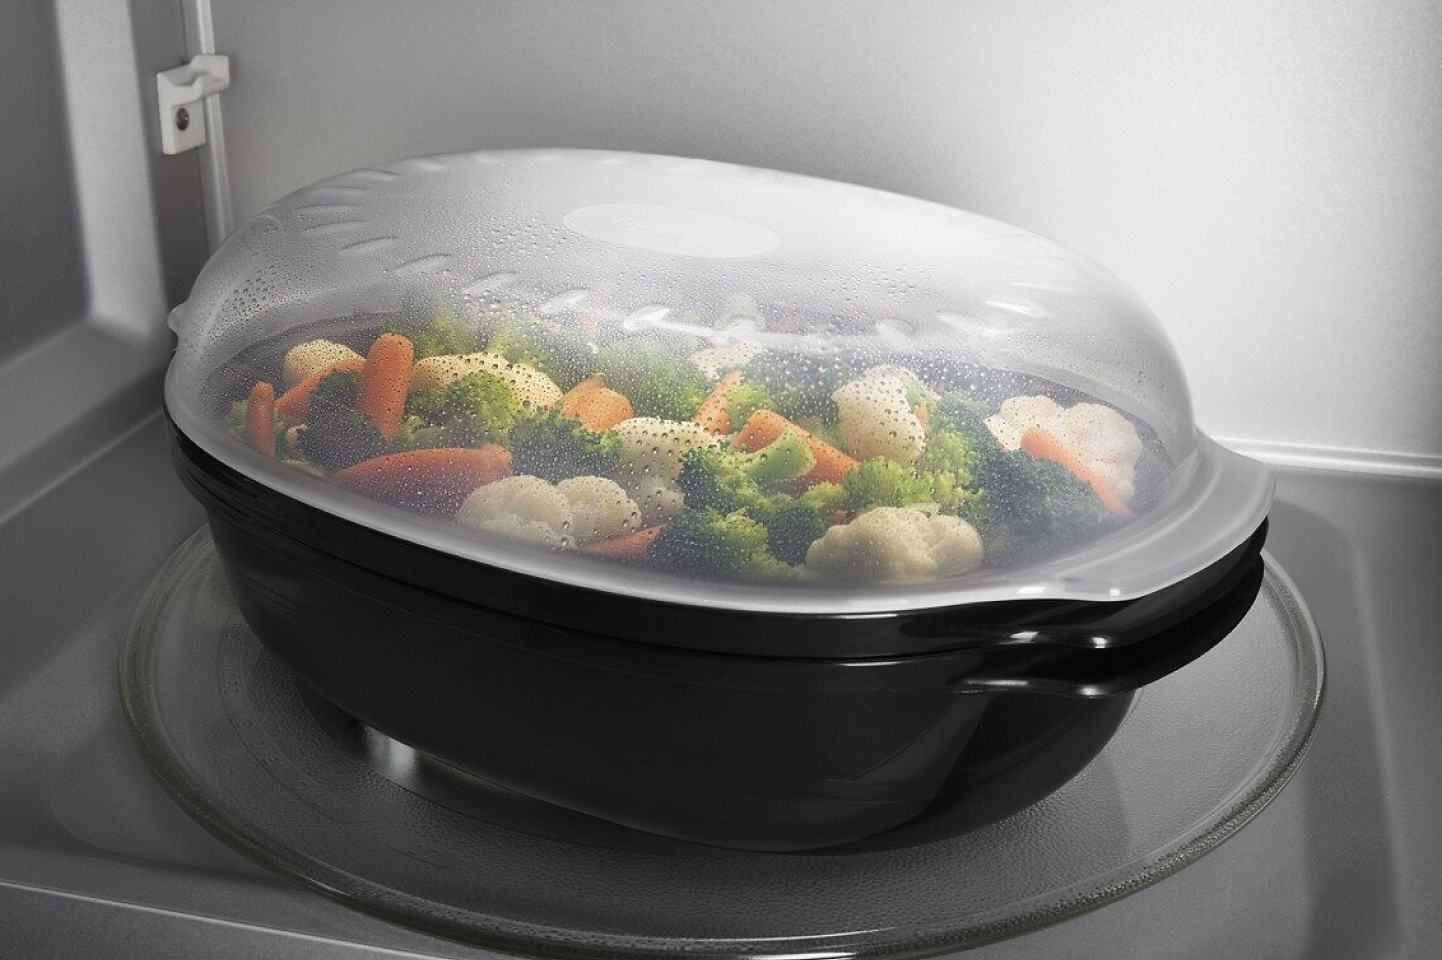 A tray of vegetables inside a microwave.